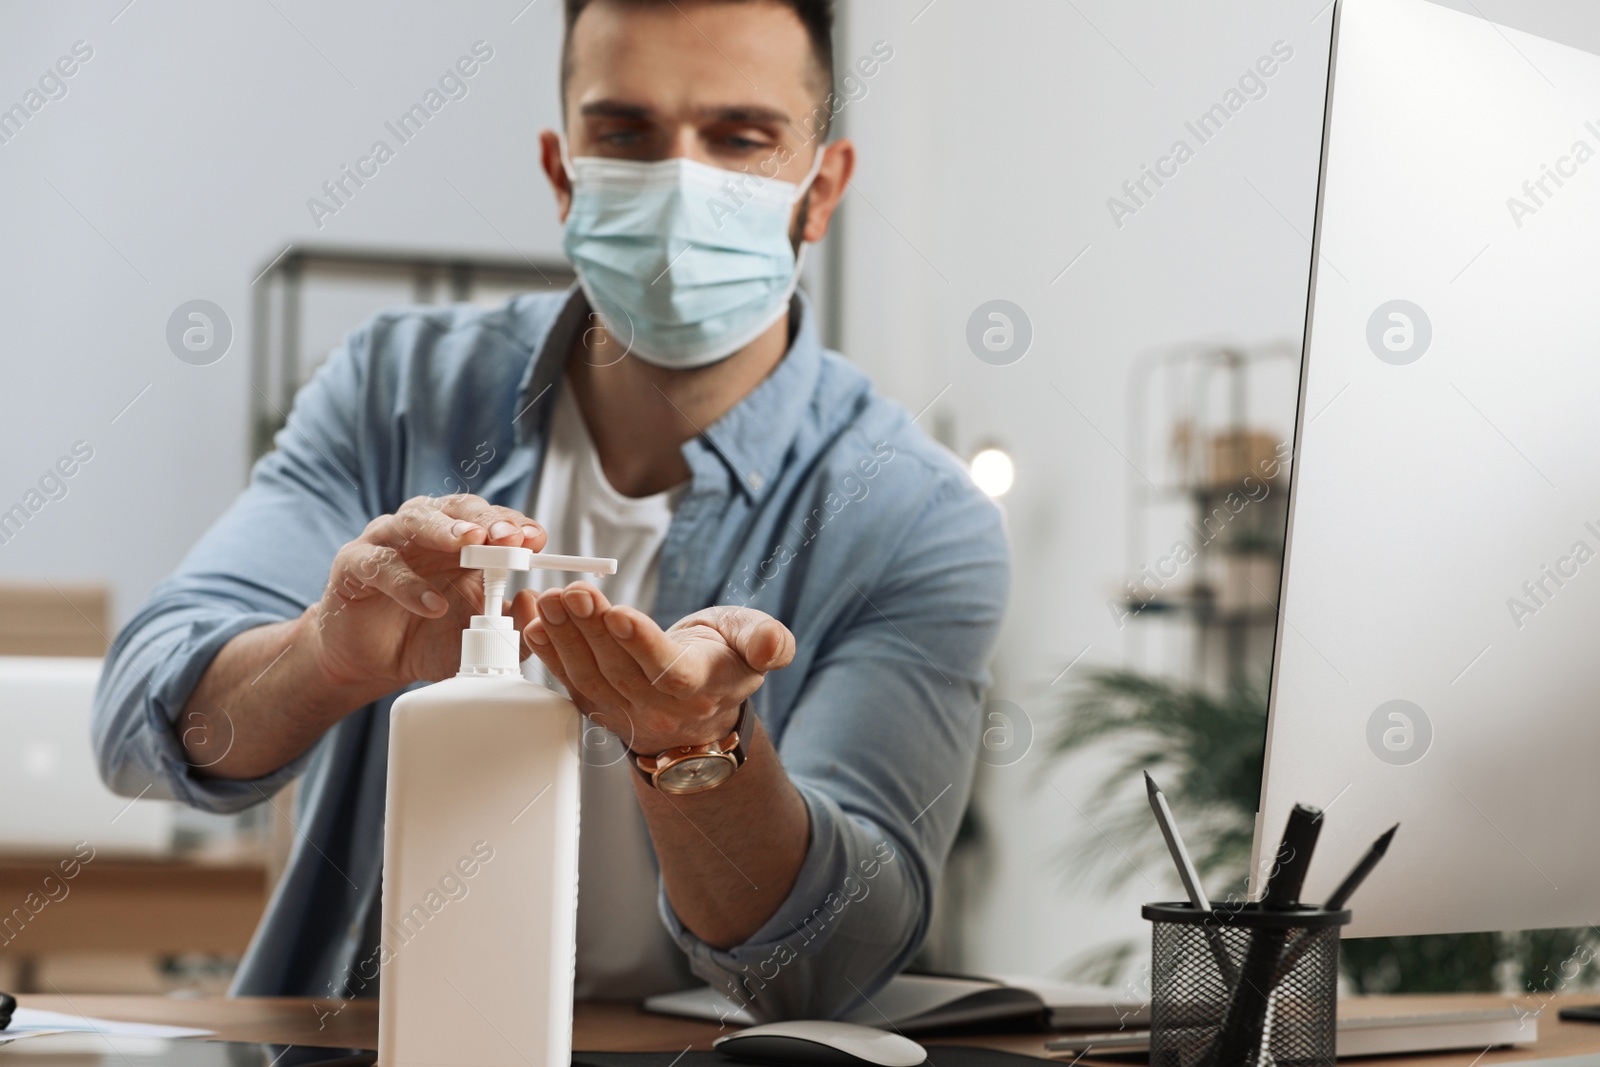 Photo of Man applying sanitizer in office, focus on hands. Personal hygiene during Coronavirus pandemic